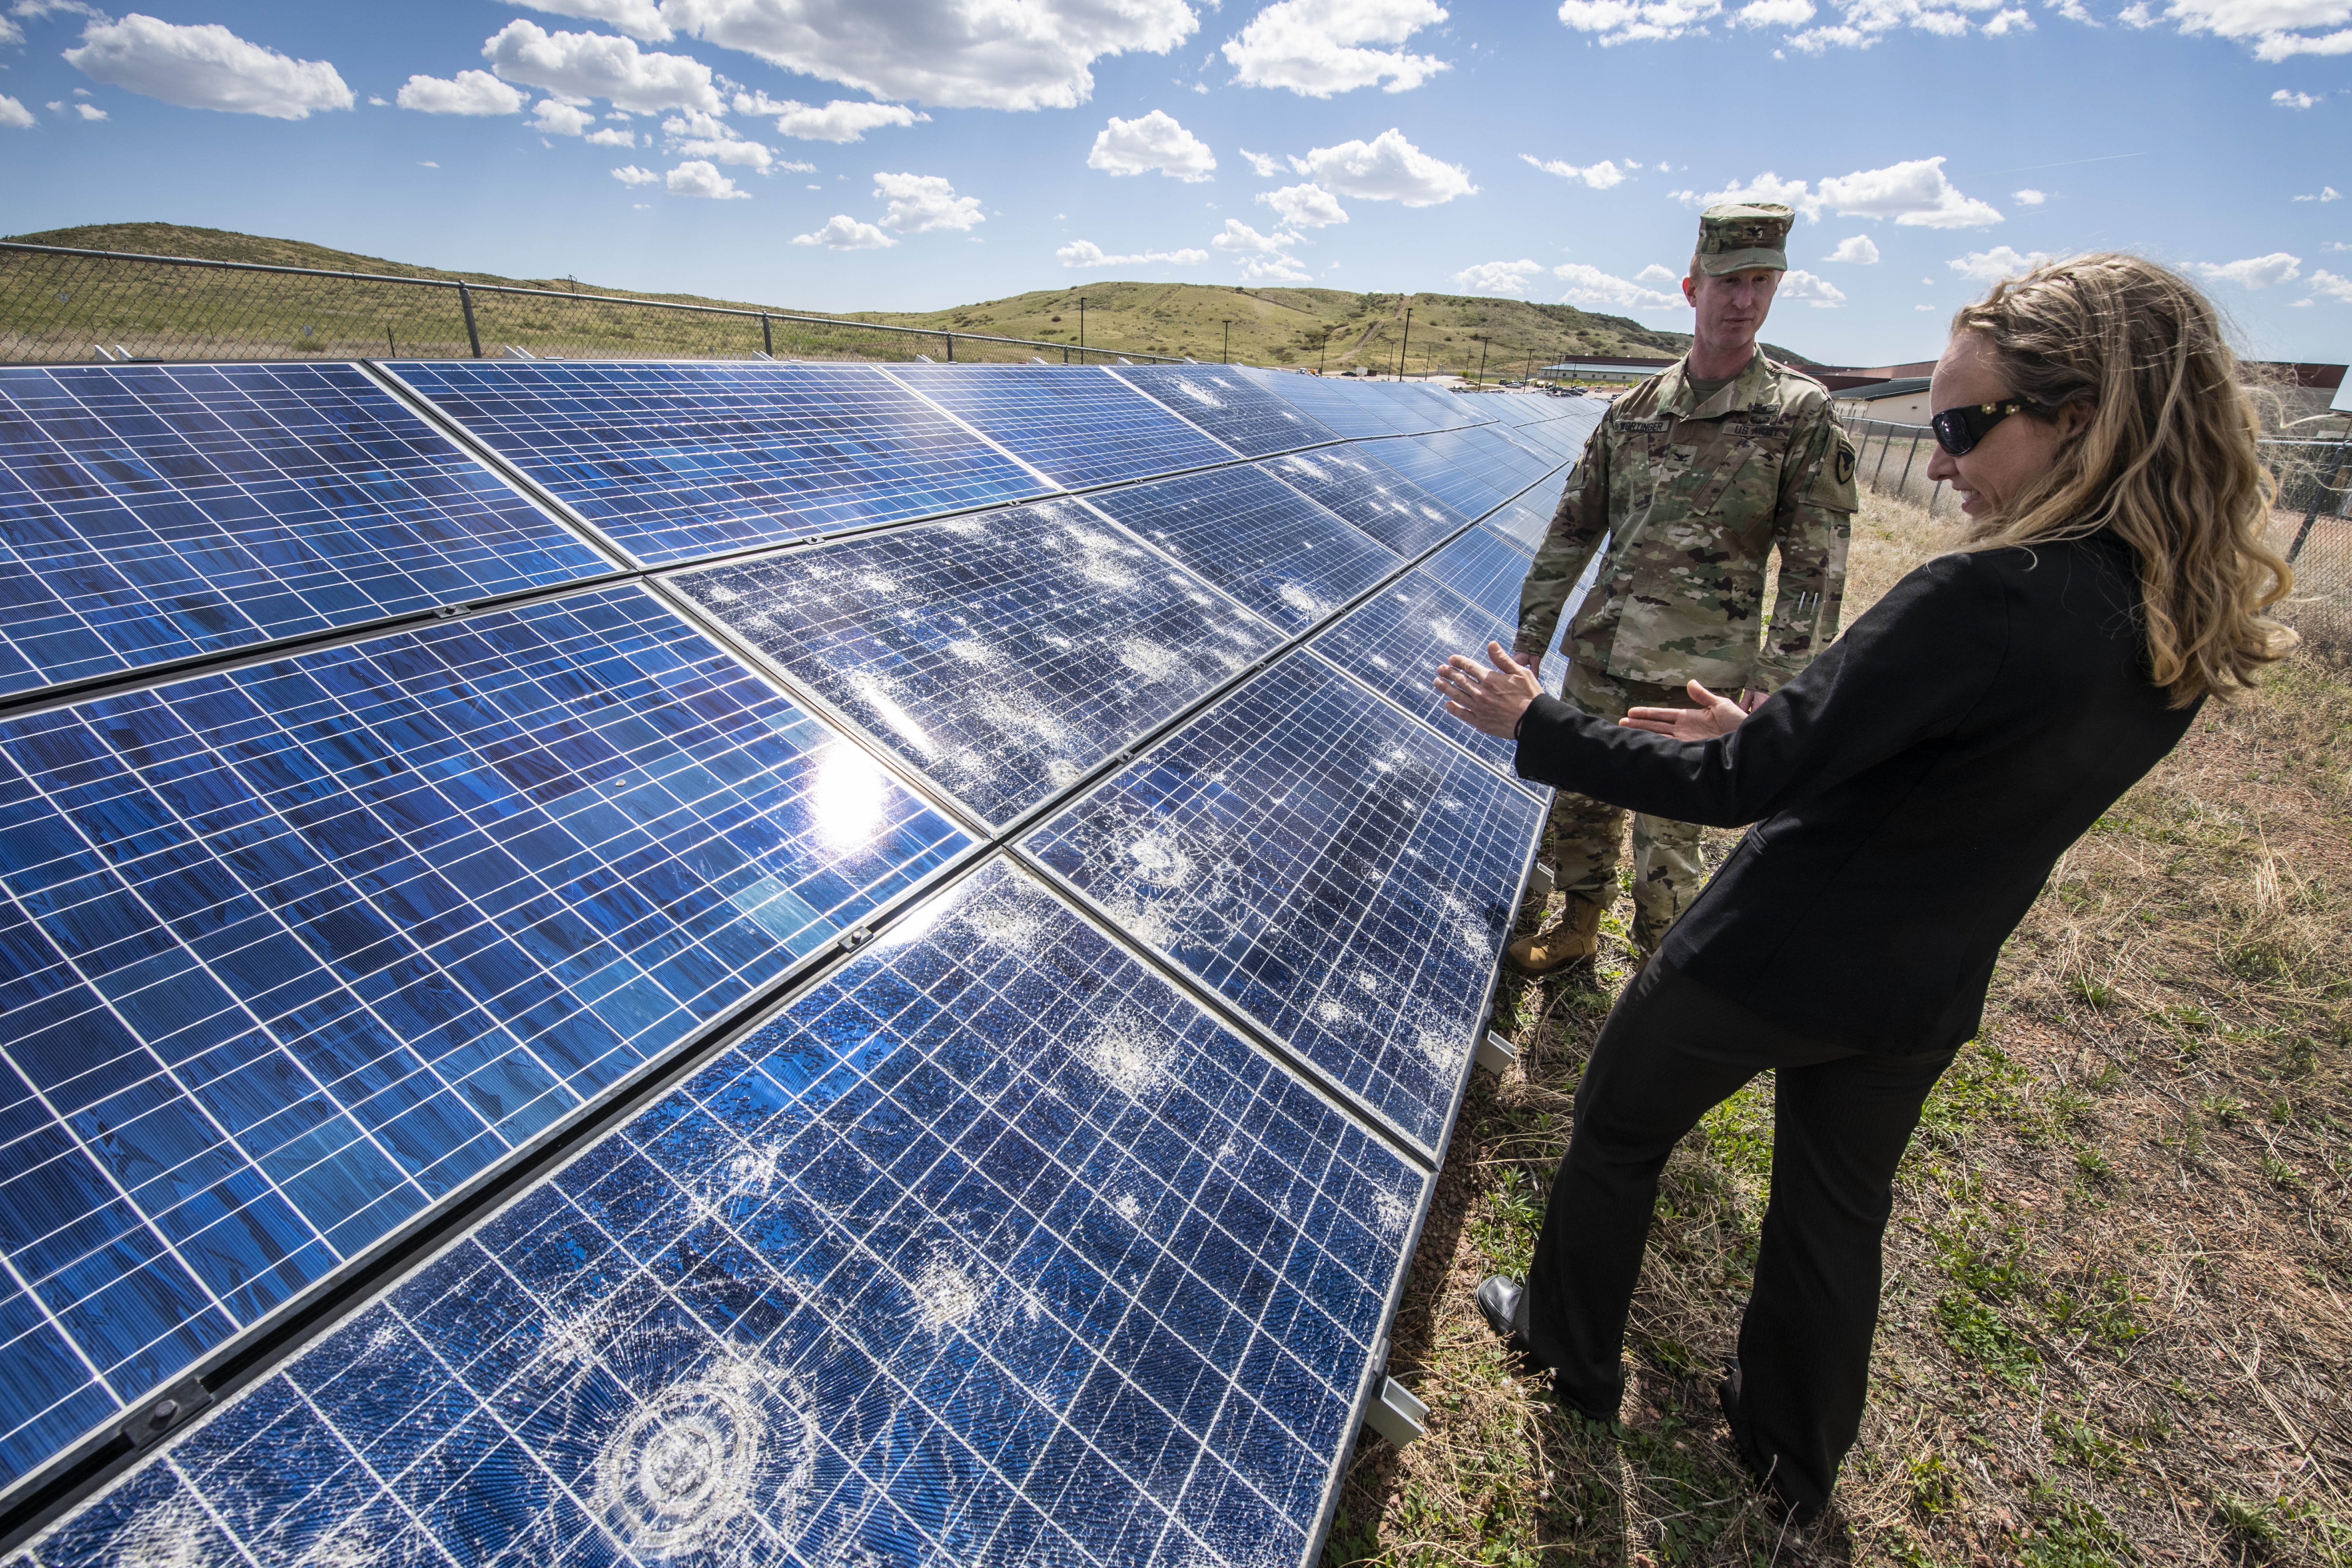 Kate Anderson and a man in uniform stand by a large solar array outside on a clear day.